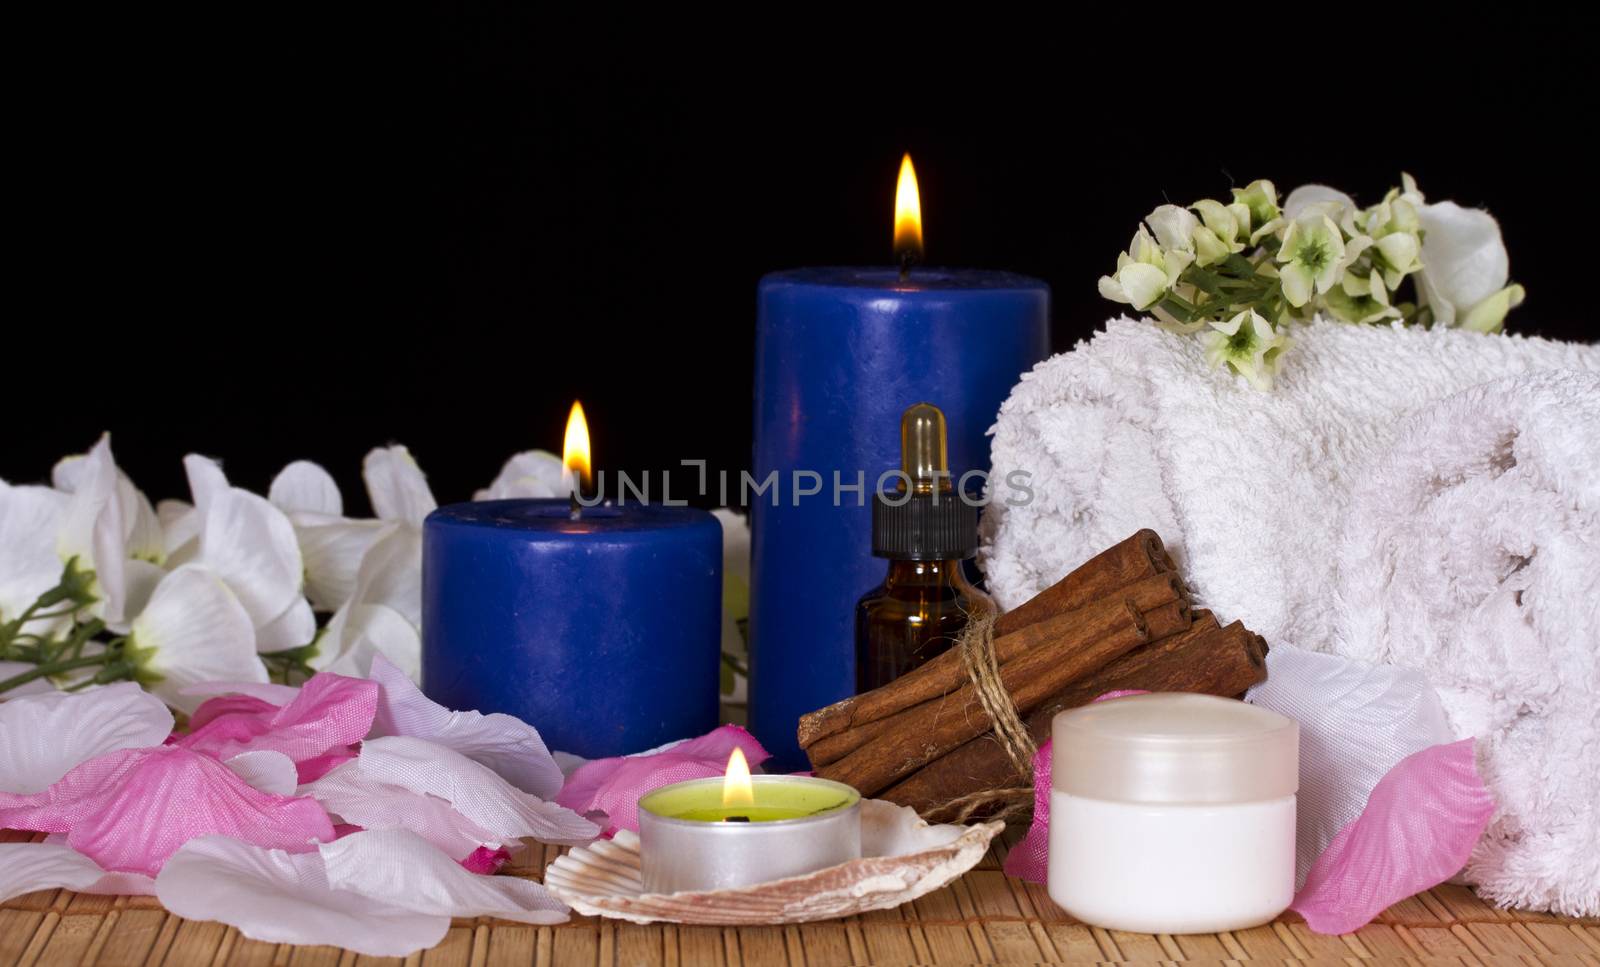 Spa facilities for massage and relaxation by Irina1977